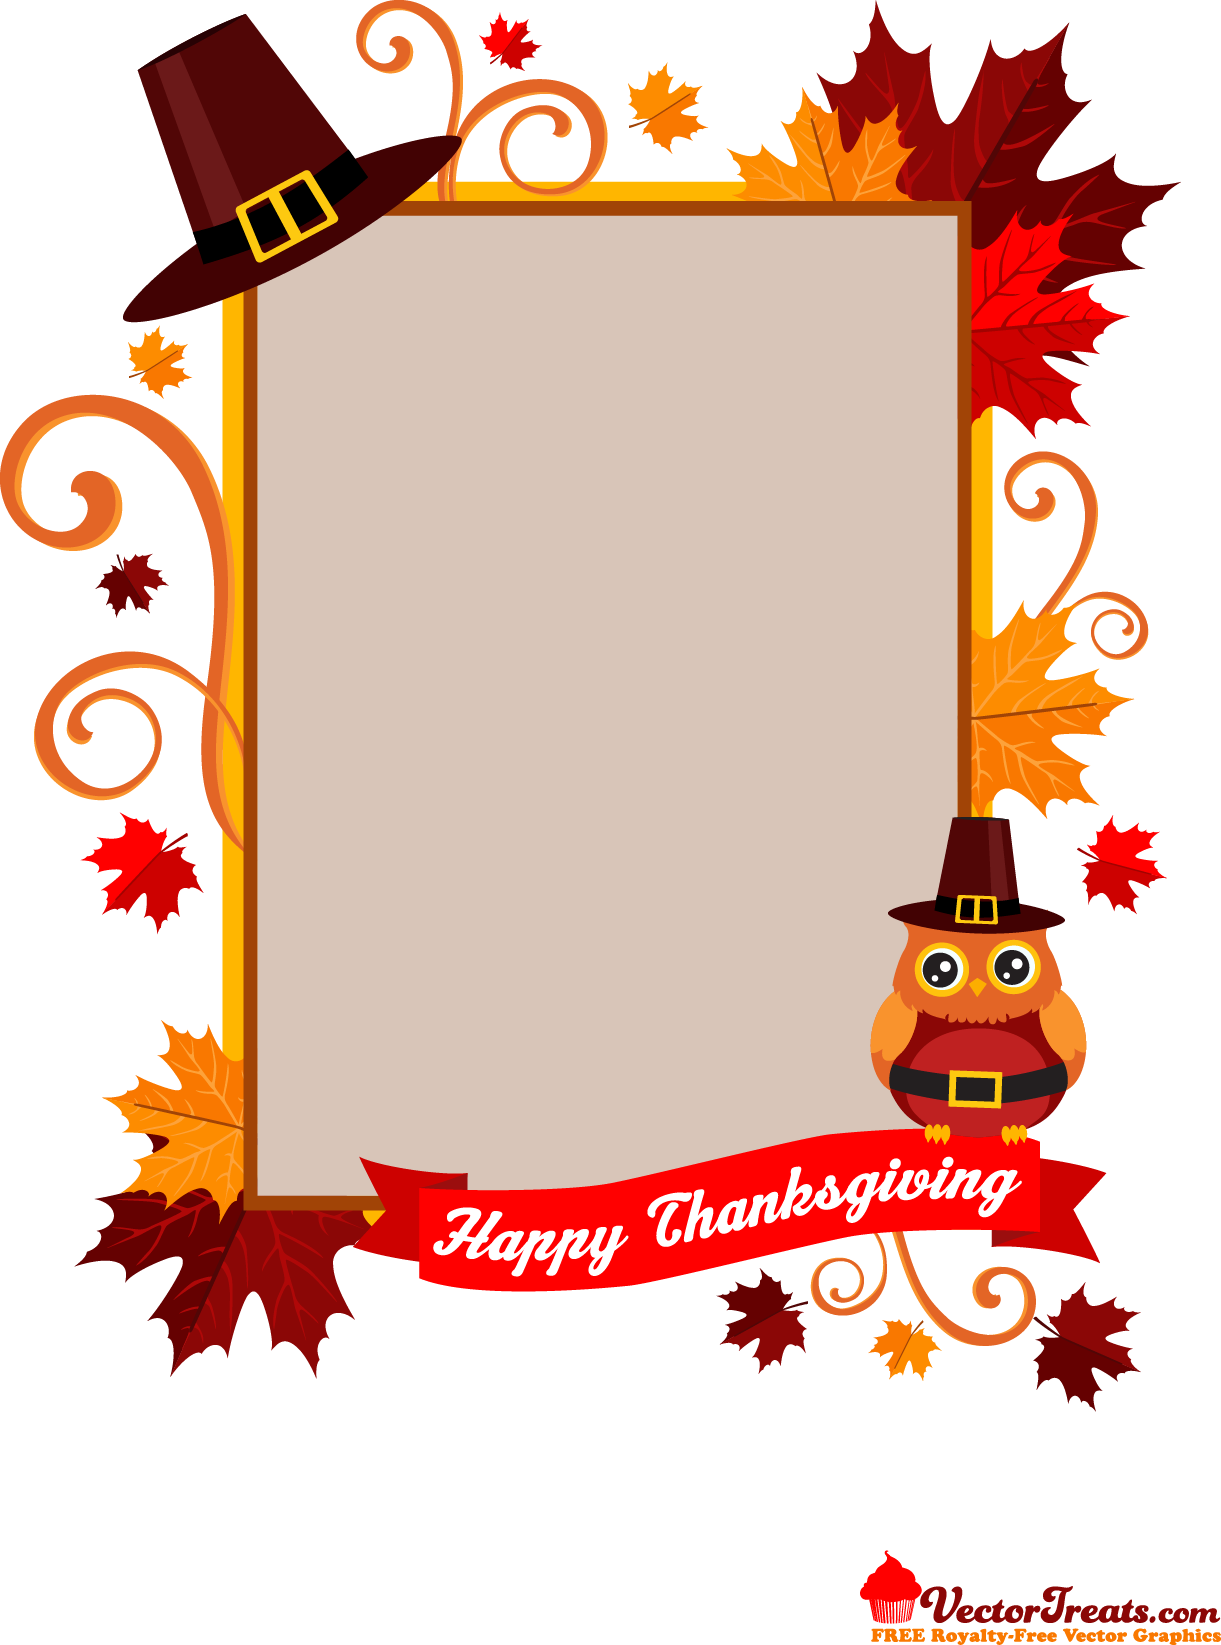 So Thankful For Free Thanksgiving Vector Graphics. Free thanksgiving printables, Thanksgiving photo, Thanksgiving